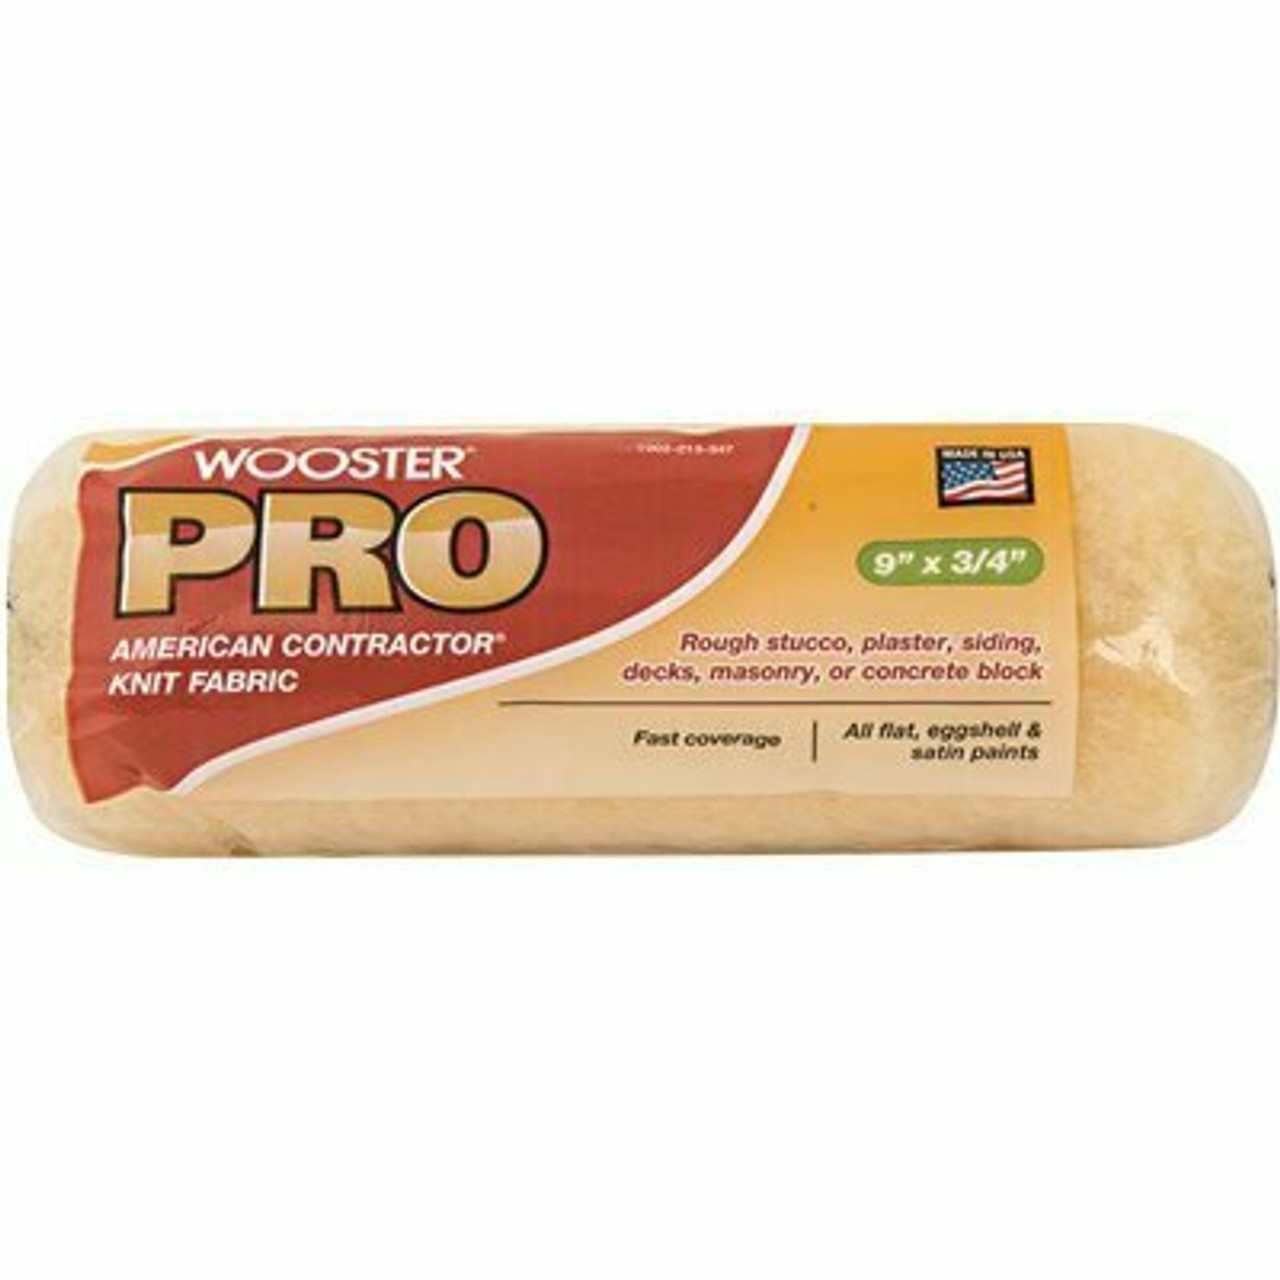 Wooster 9 In. X 3/4 In Pro American Contractor High-Density Knit Fabric Roller